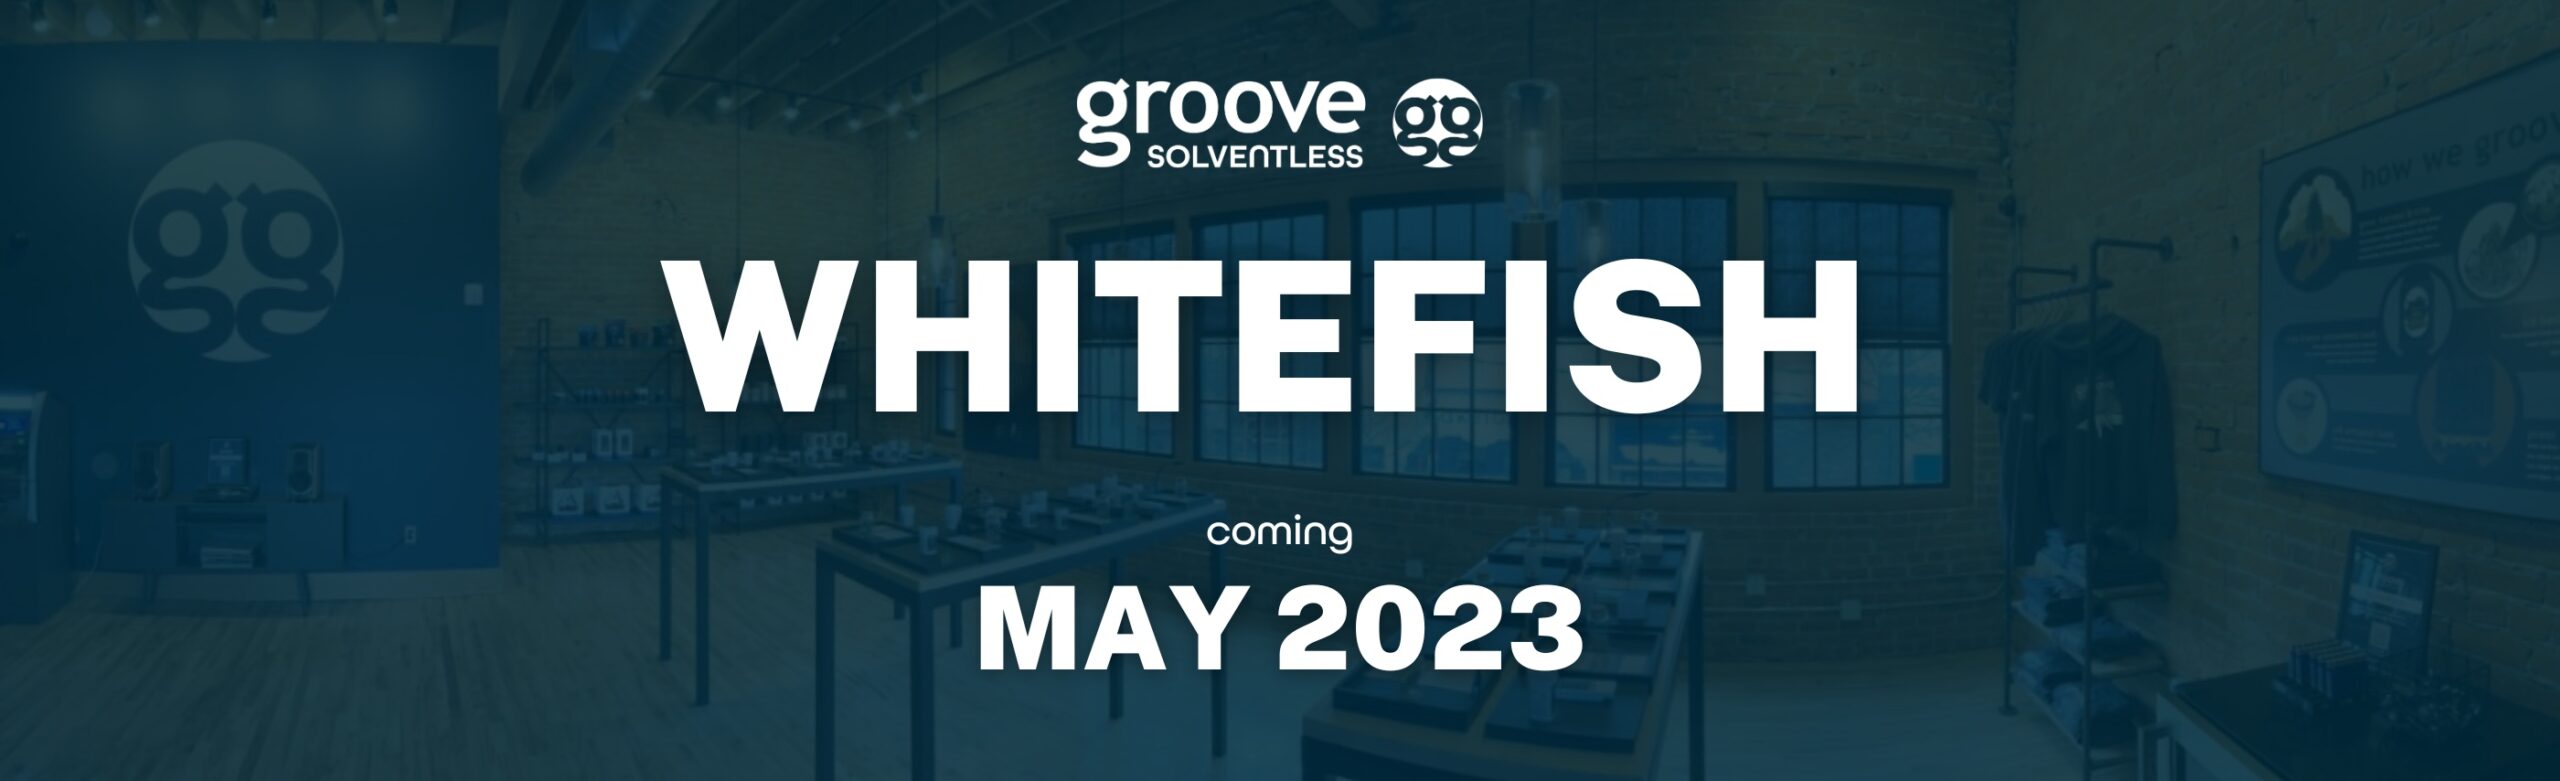 Whitefish Get Ready! Groove Solventless Showroom Coming Soon Image